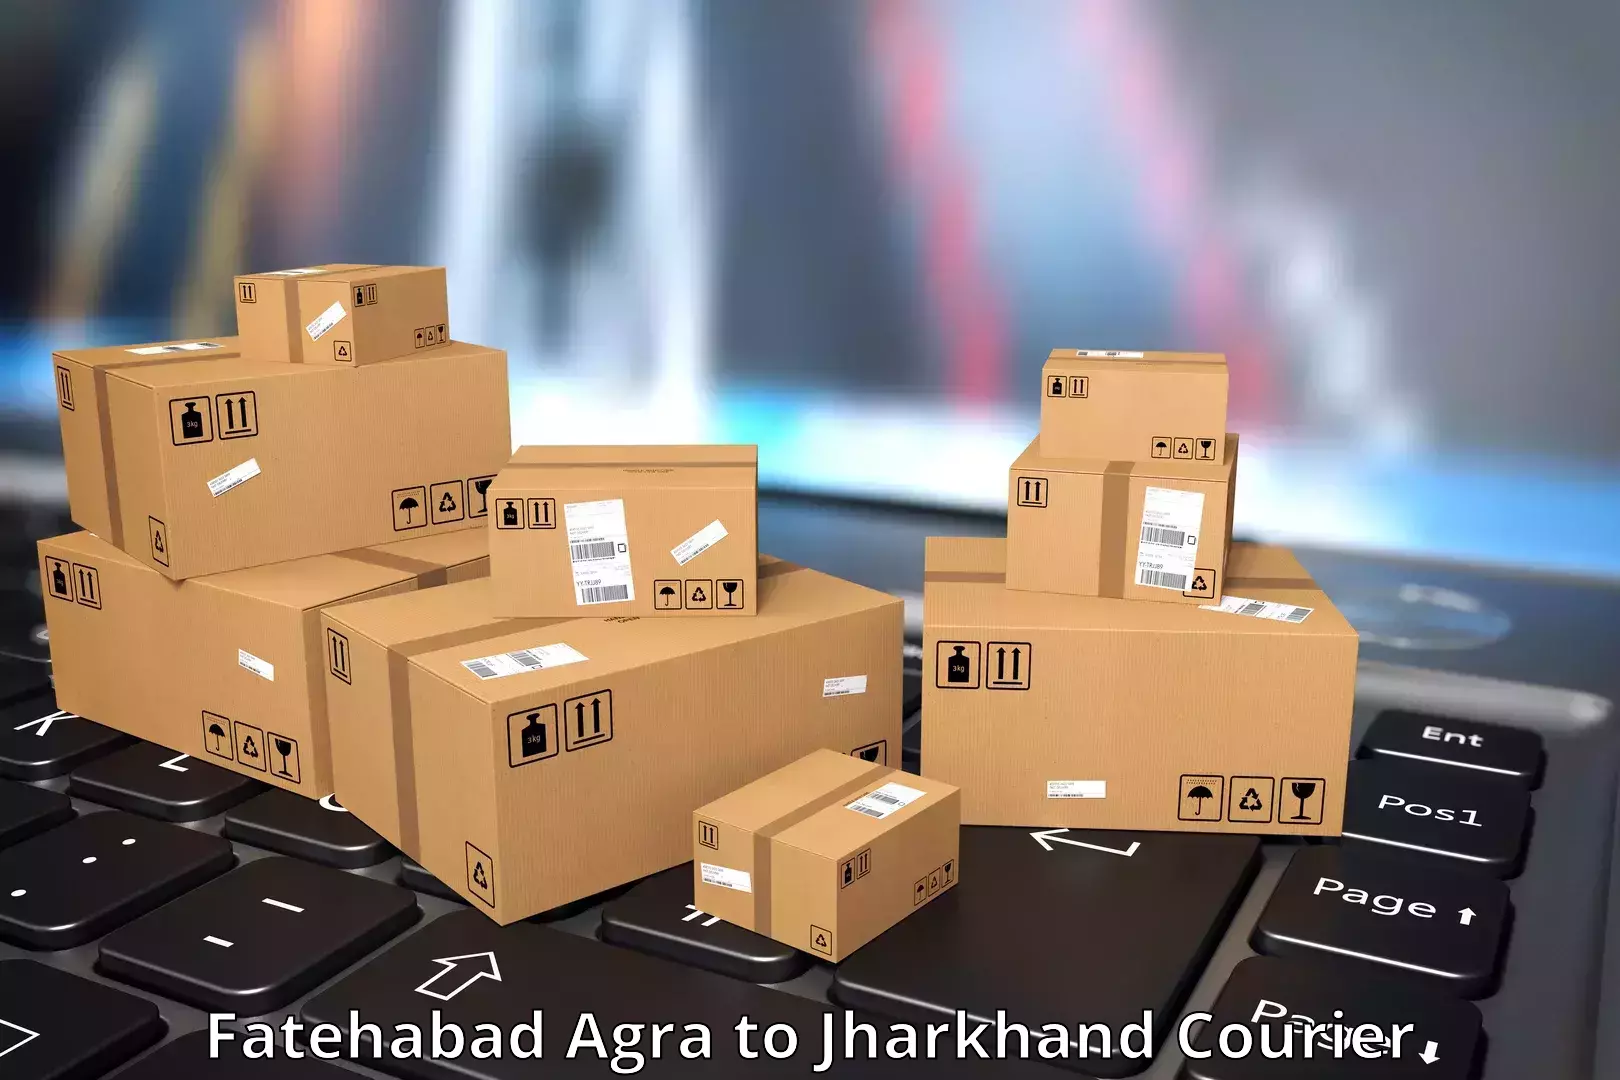 Secure package delivery Fatehabad Agra to Chandil